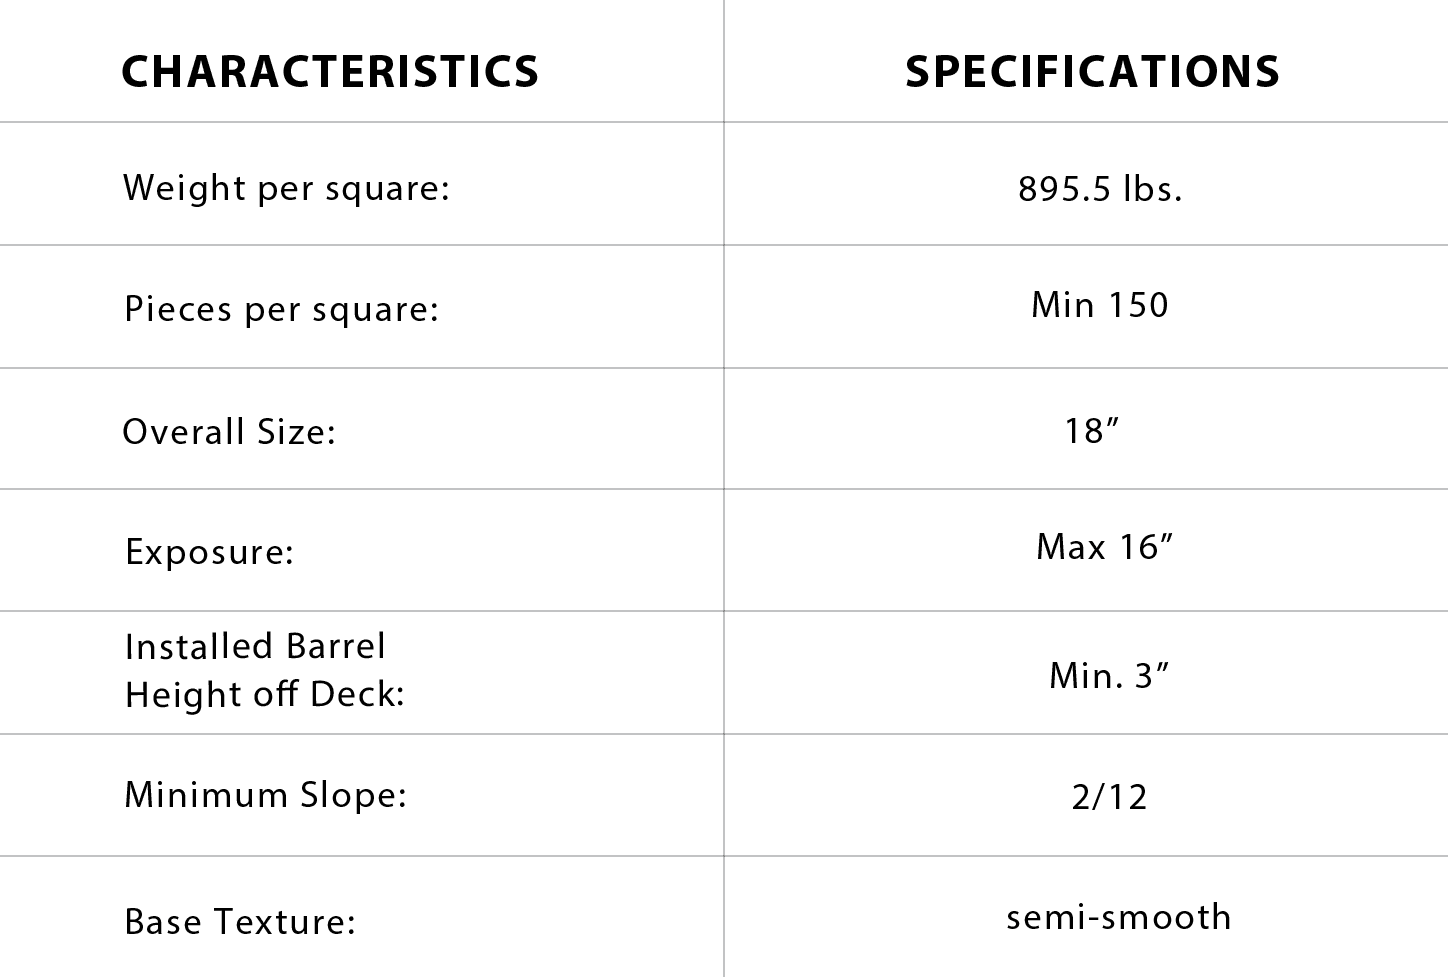 Characteristics and specifications of tiles